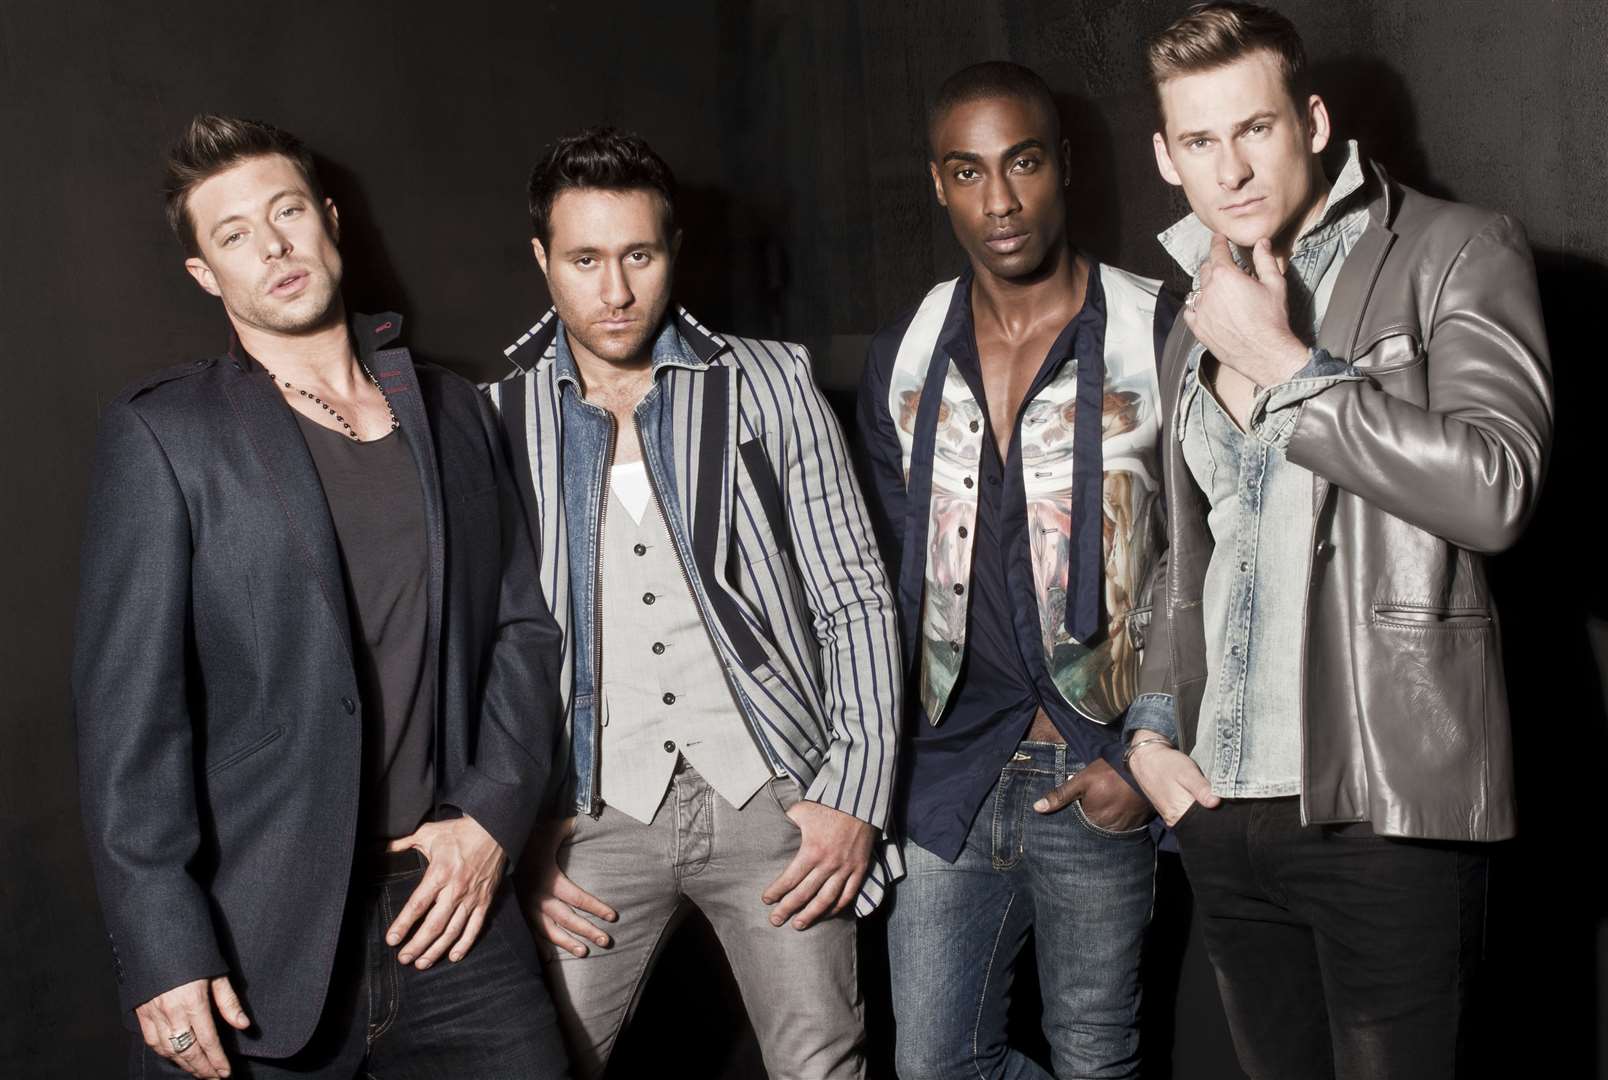 Lee Ryan, far right, was a member of the boyband Blue. Photo: Charlotte Sweeney.